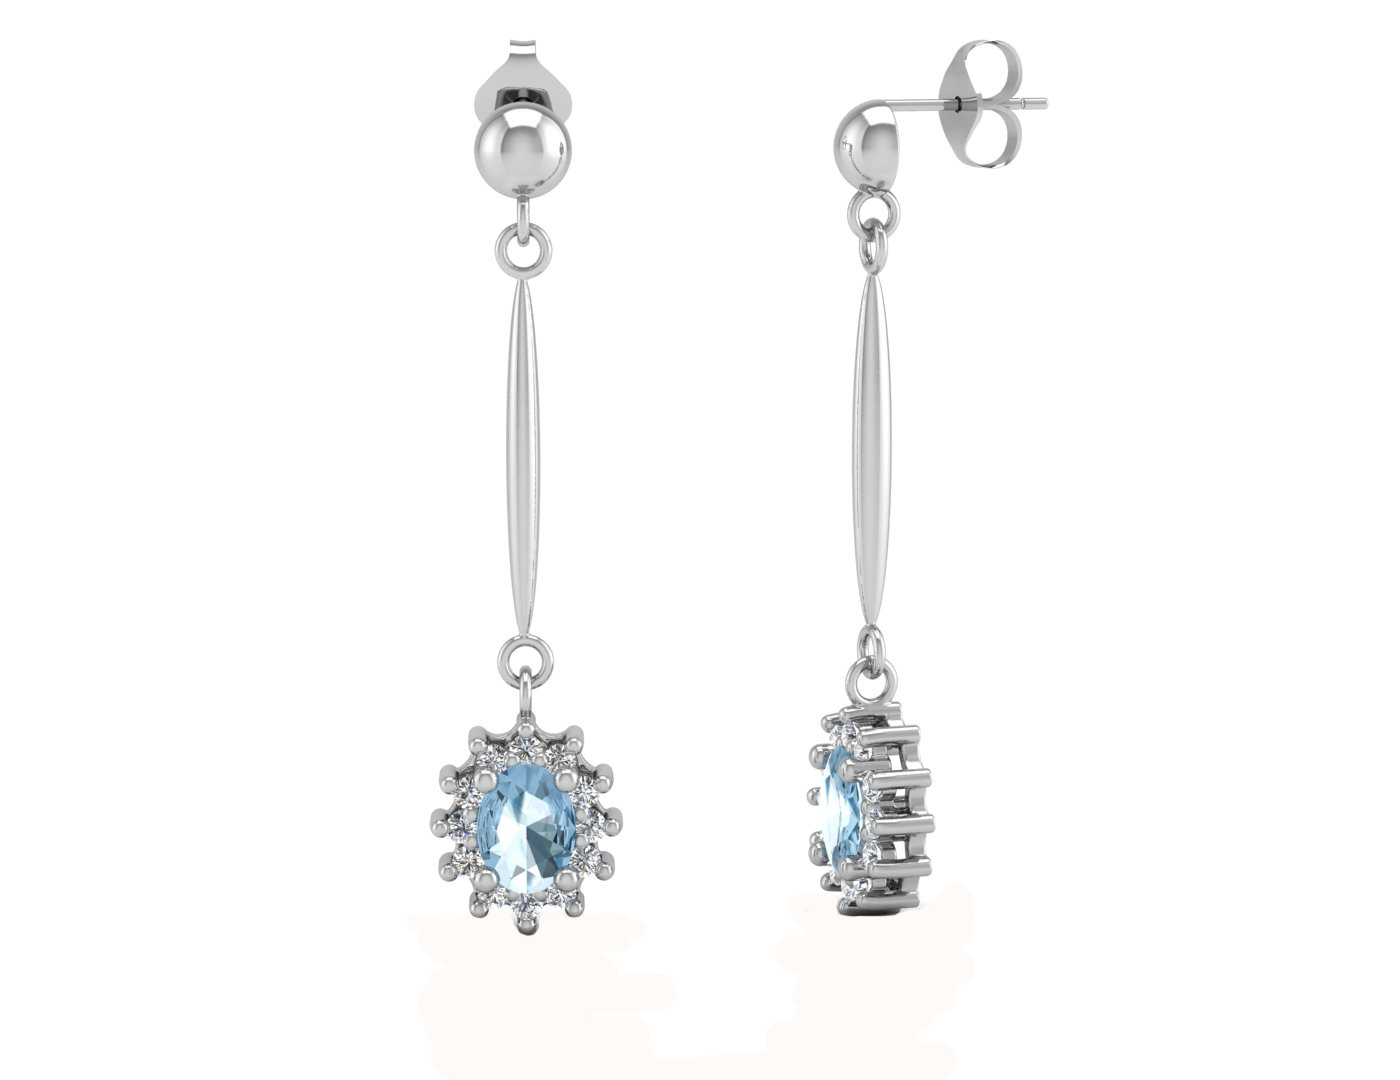 9ct White Gold Diamond And Blue Topaz Earring 0.12 Carats